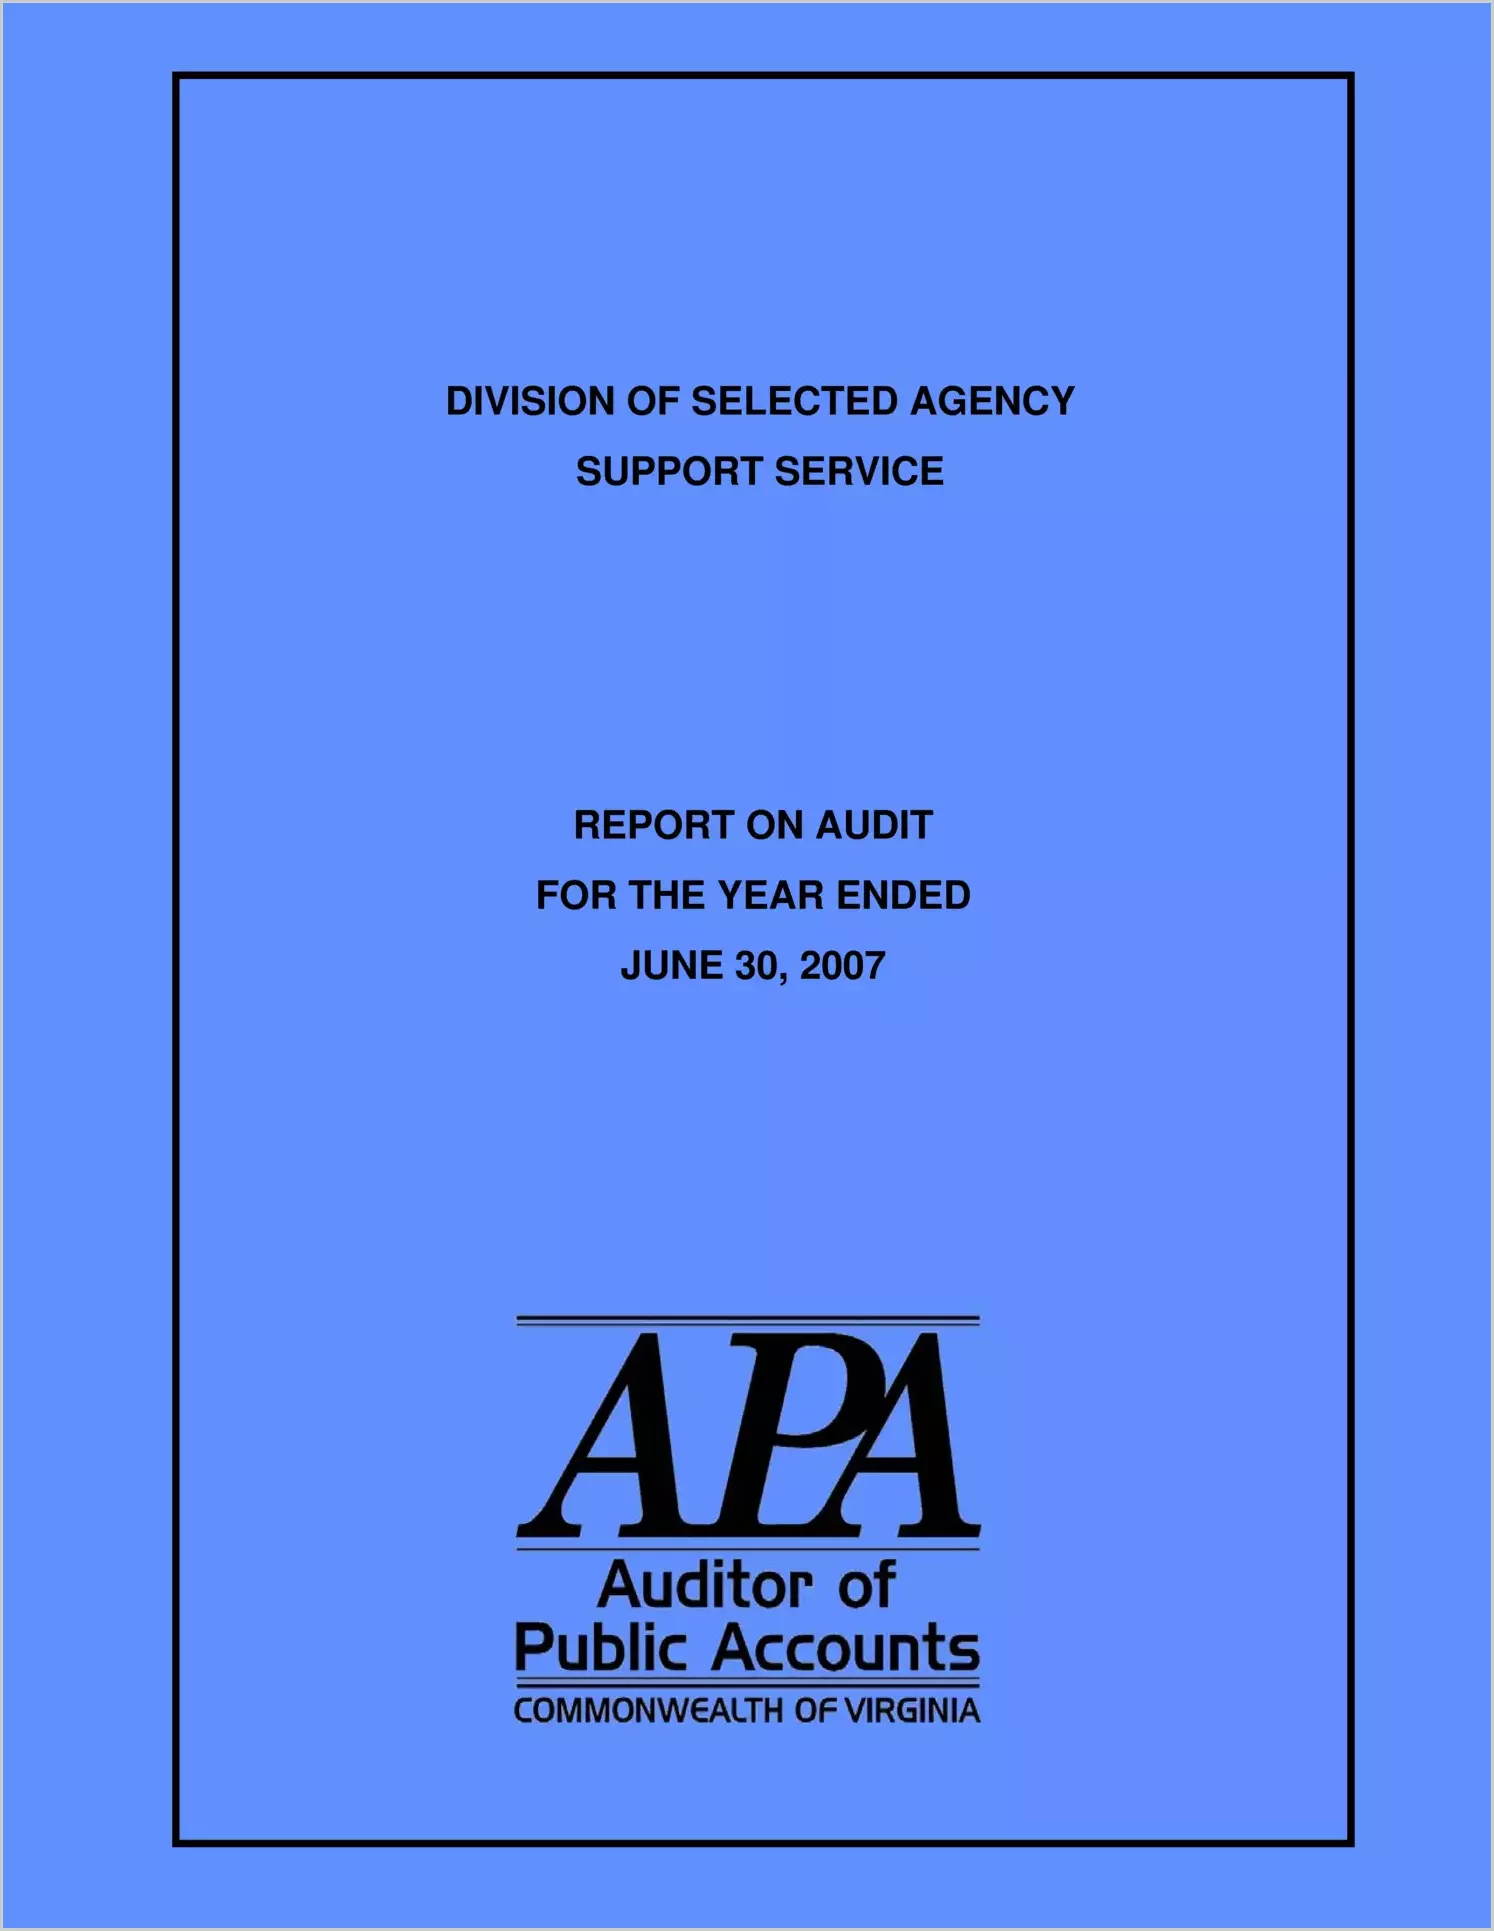 Division of Selected Agency Support Services for the year ended June 30, 2007